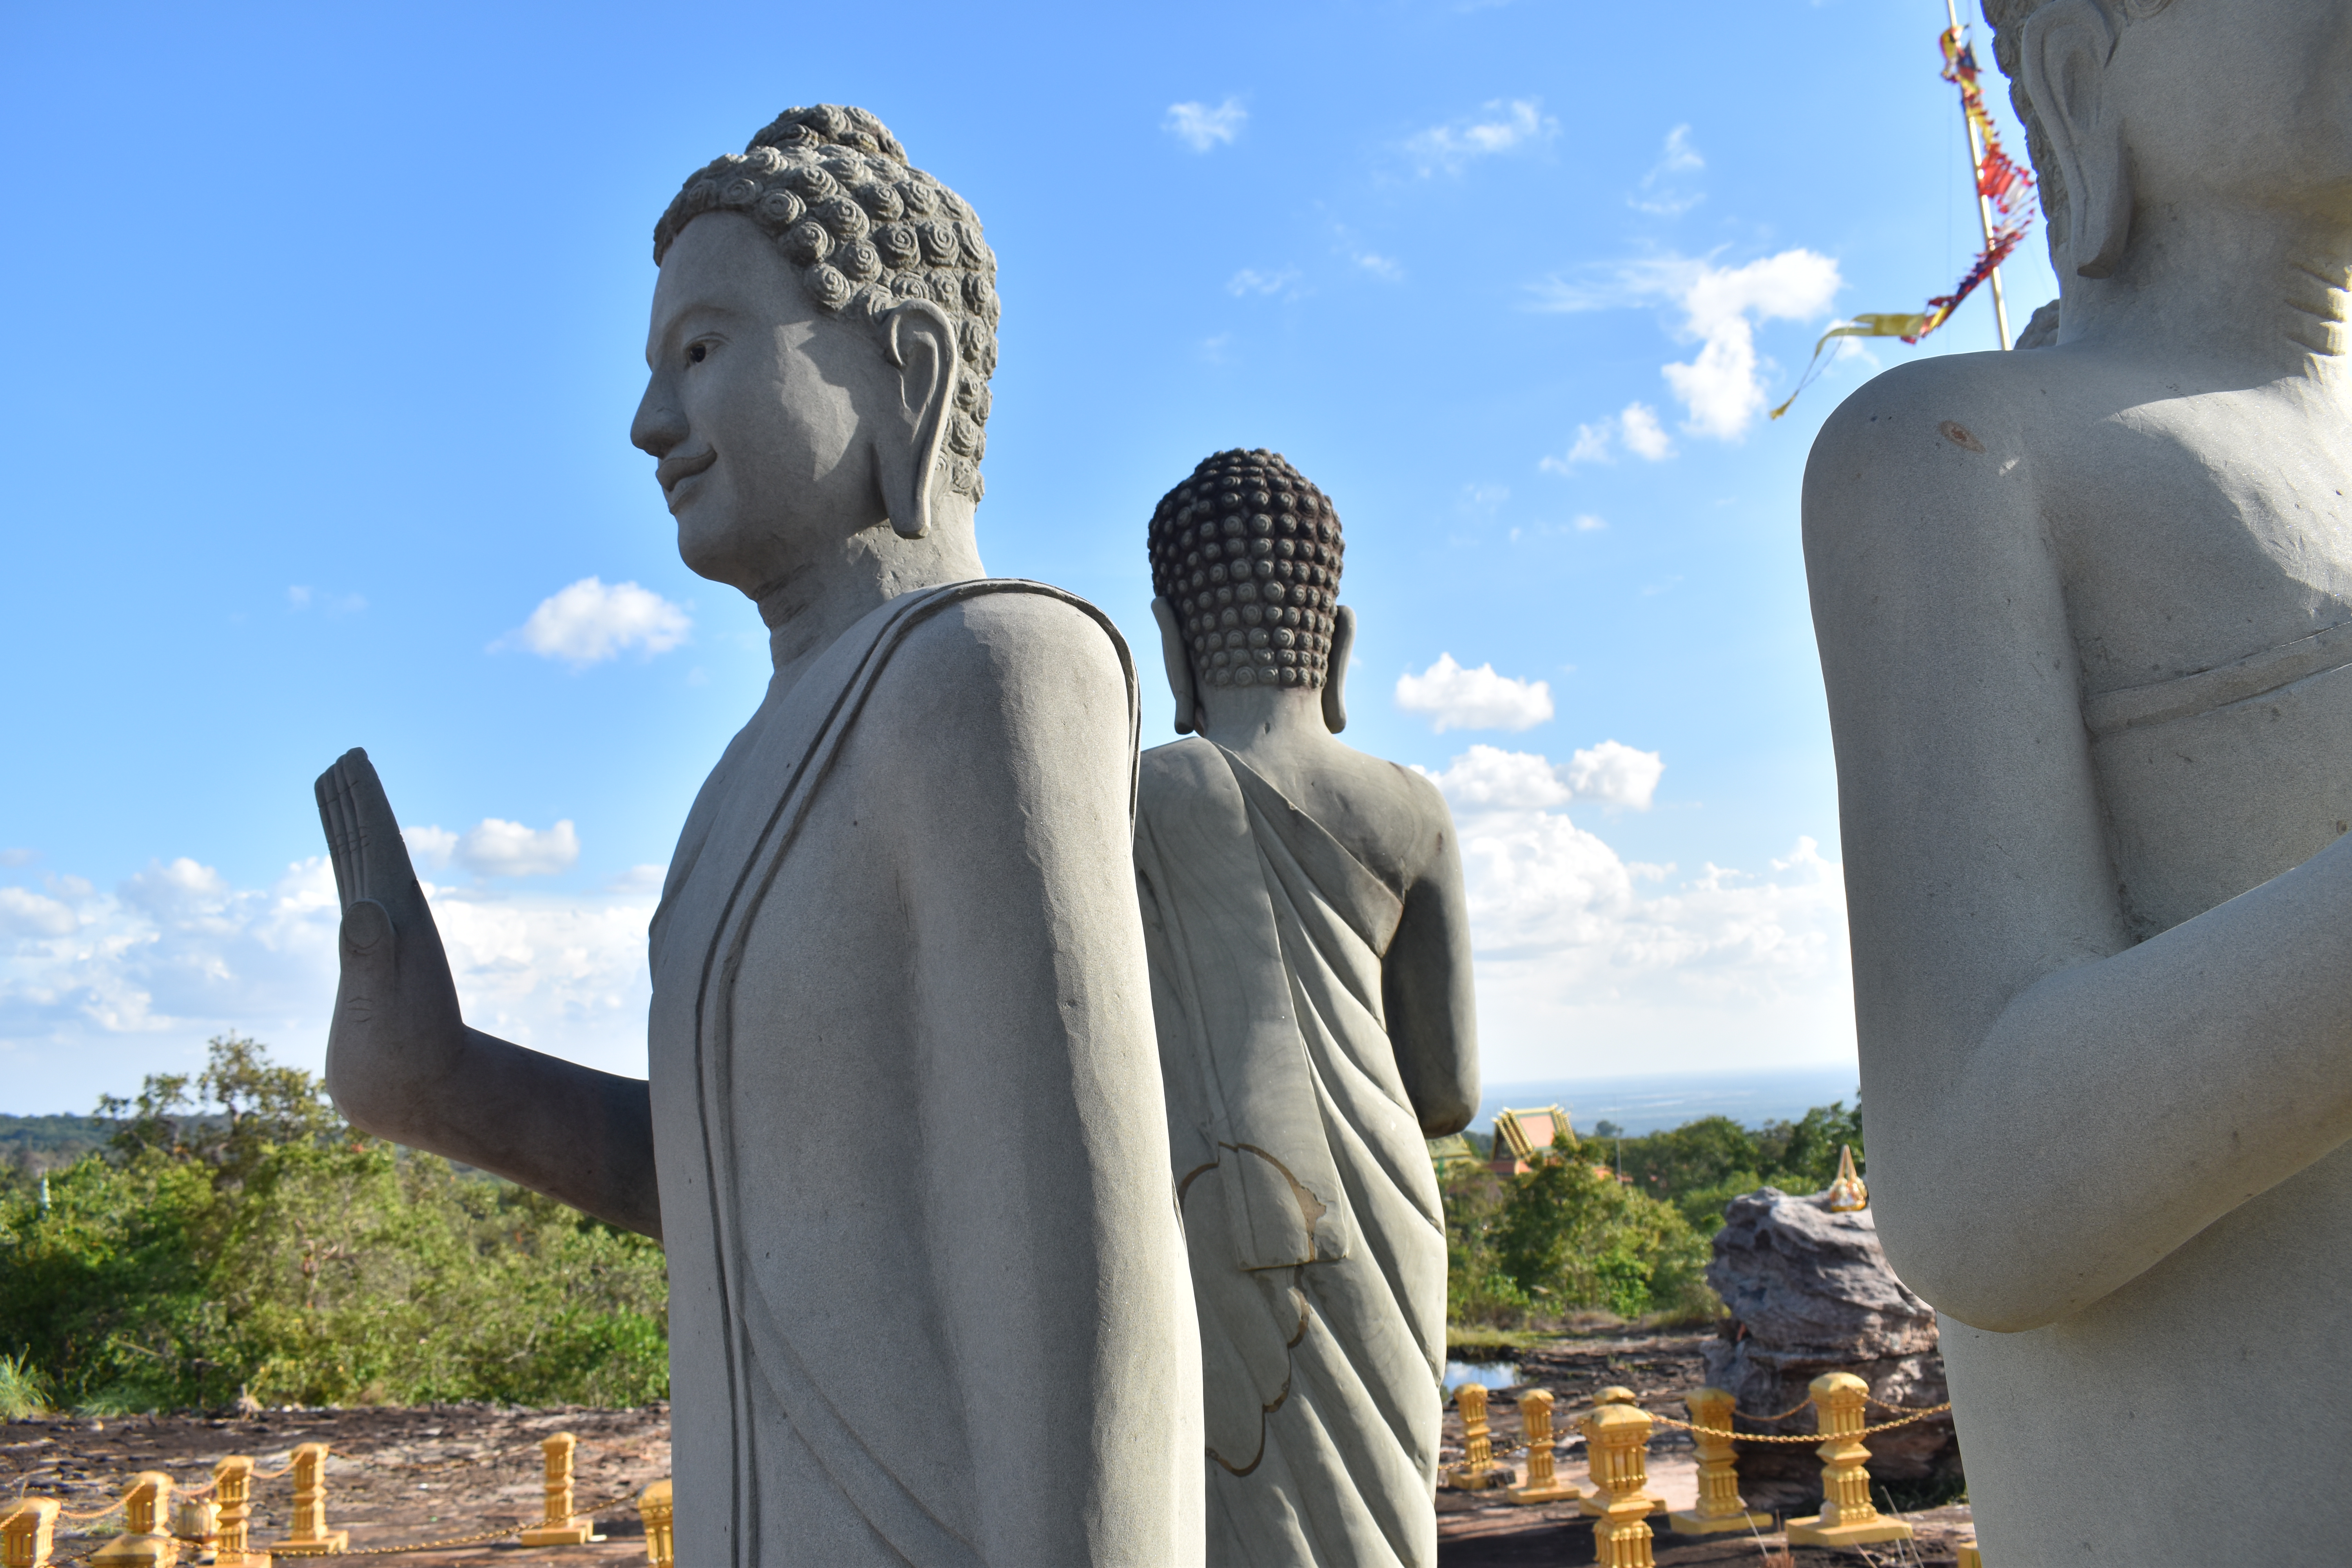 Statues of the Buddha in Cambodia